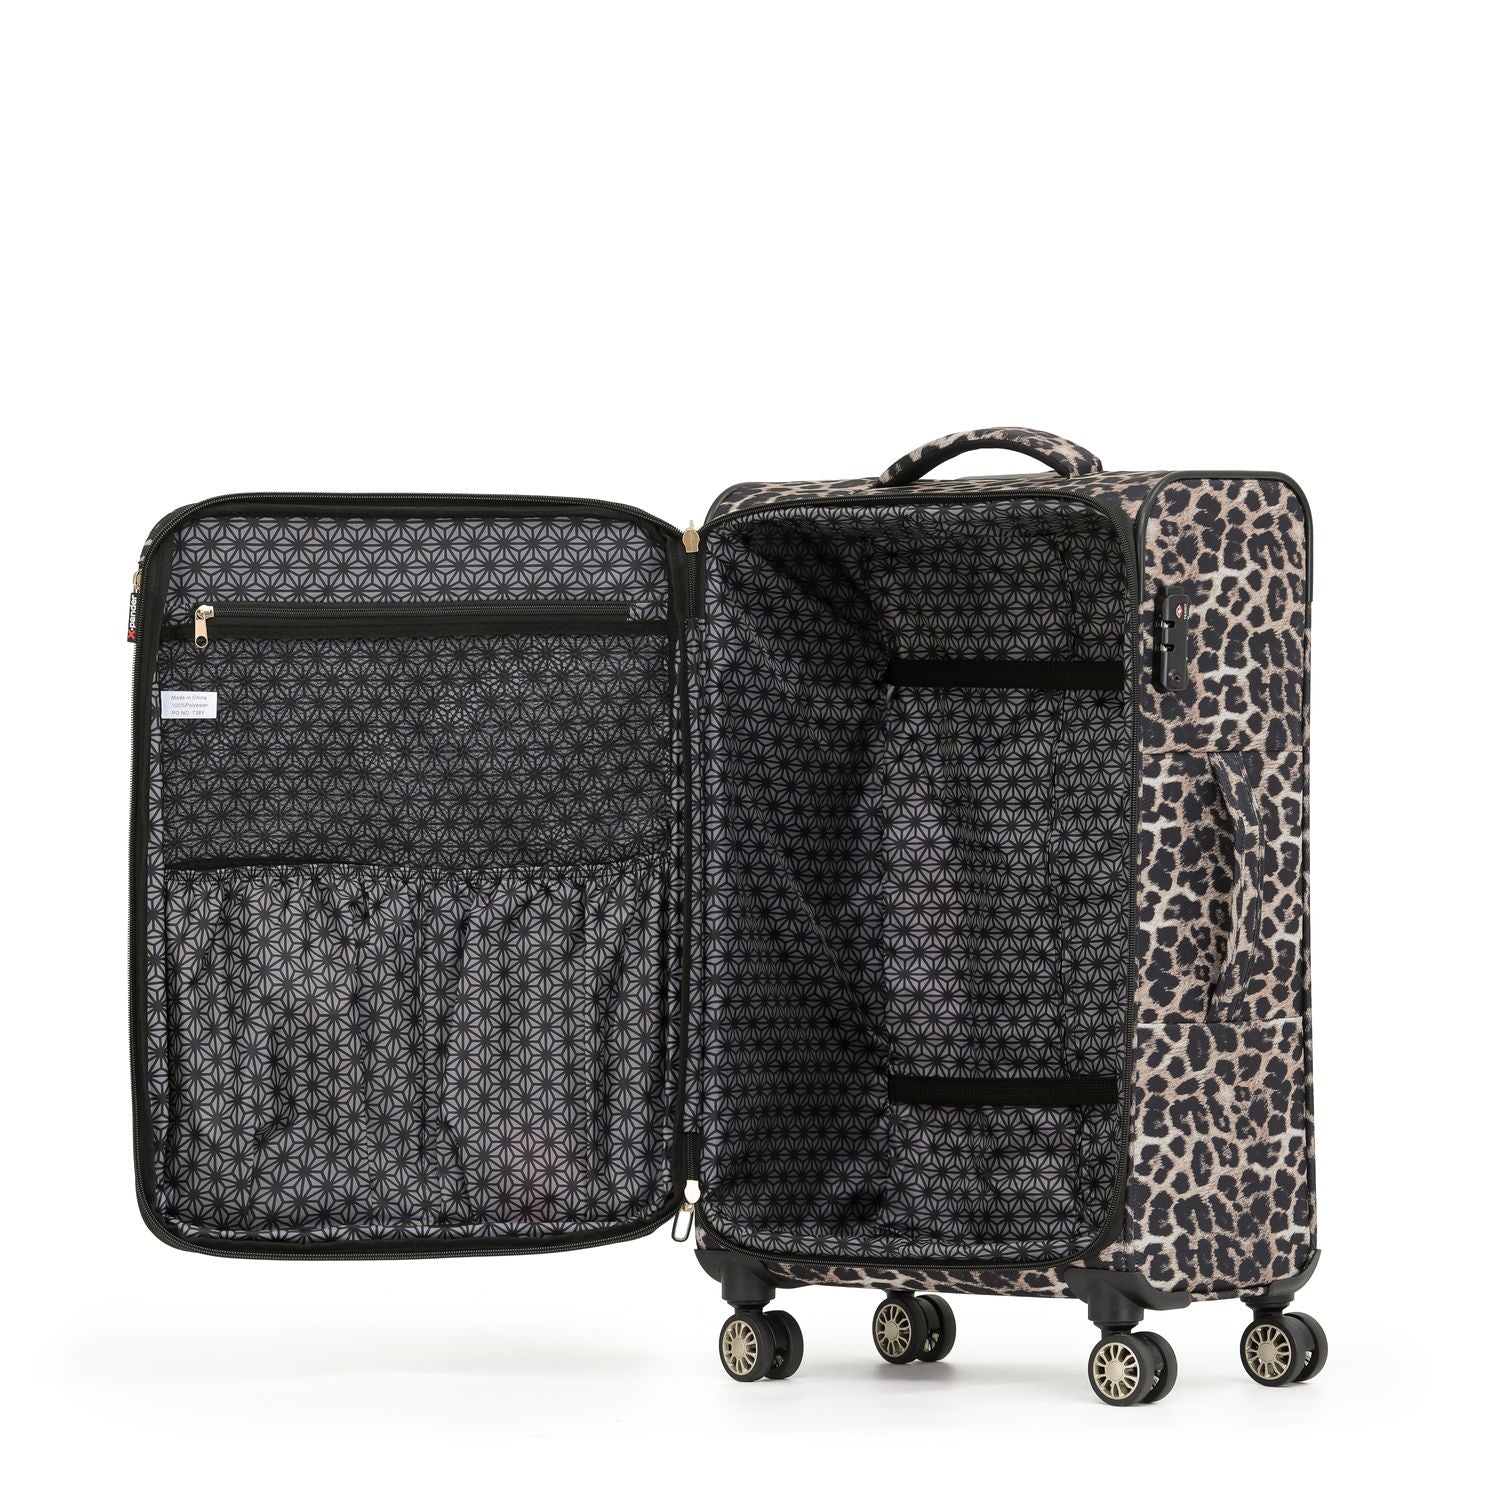 Tosca - So Lite 3.0 29in Large 4 Wheel Soft Suitcase - Leopard - 0